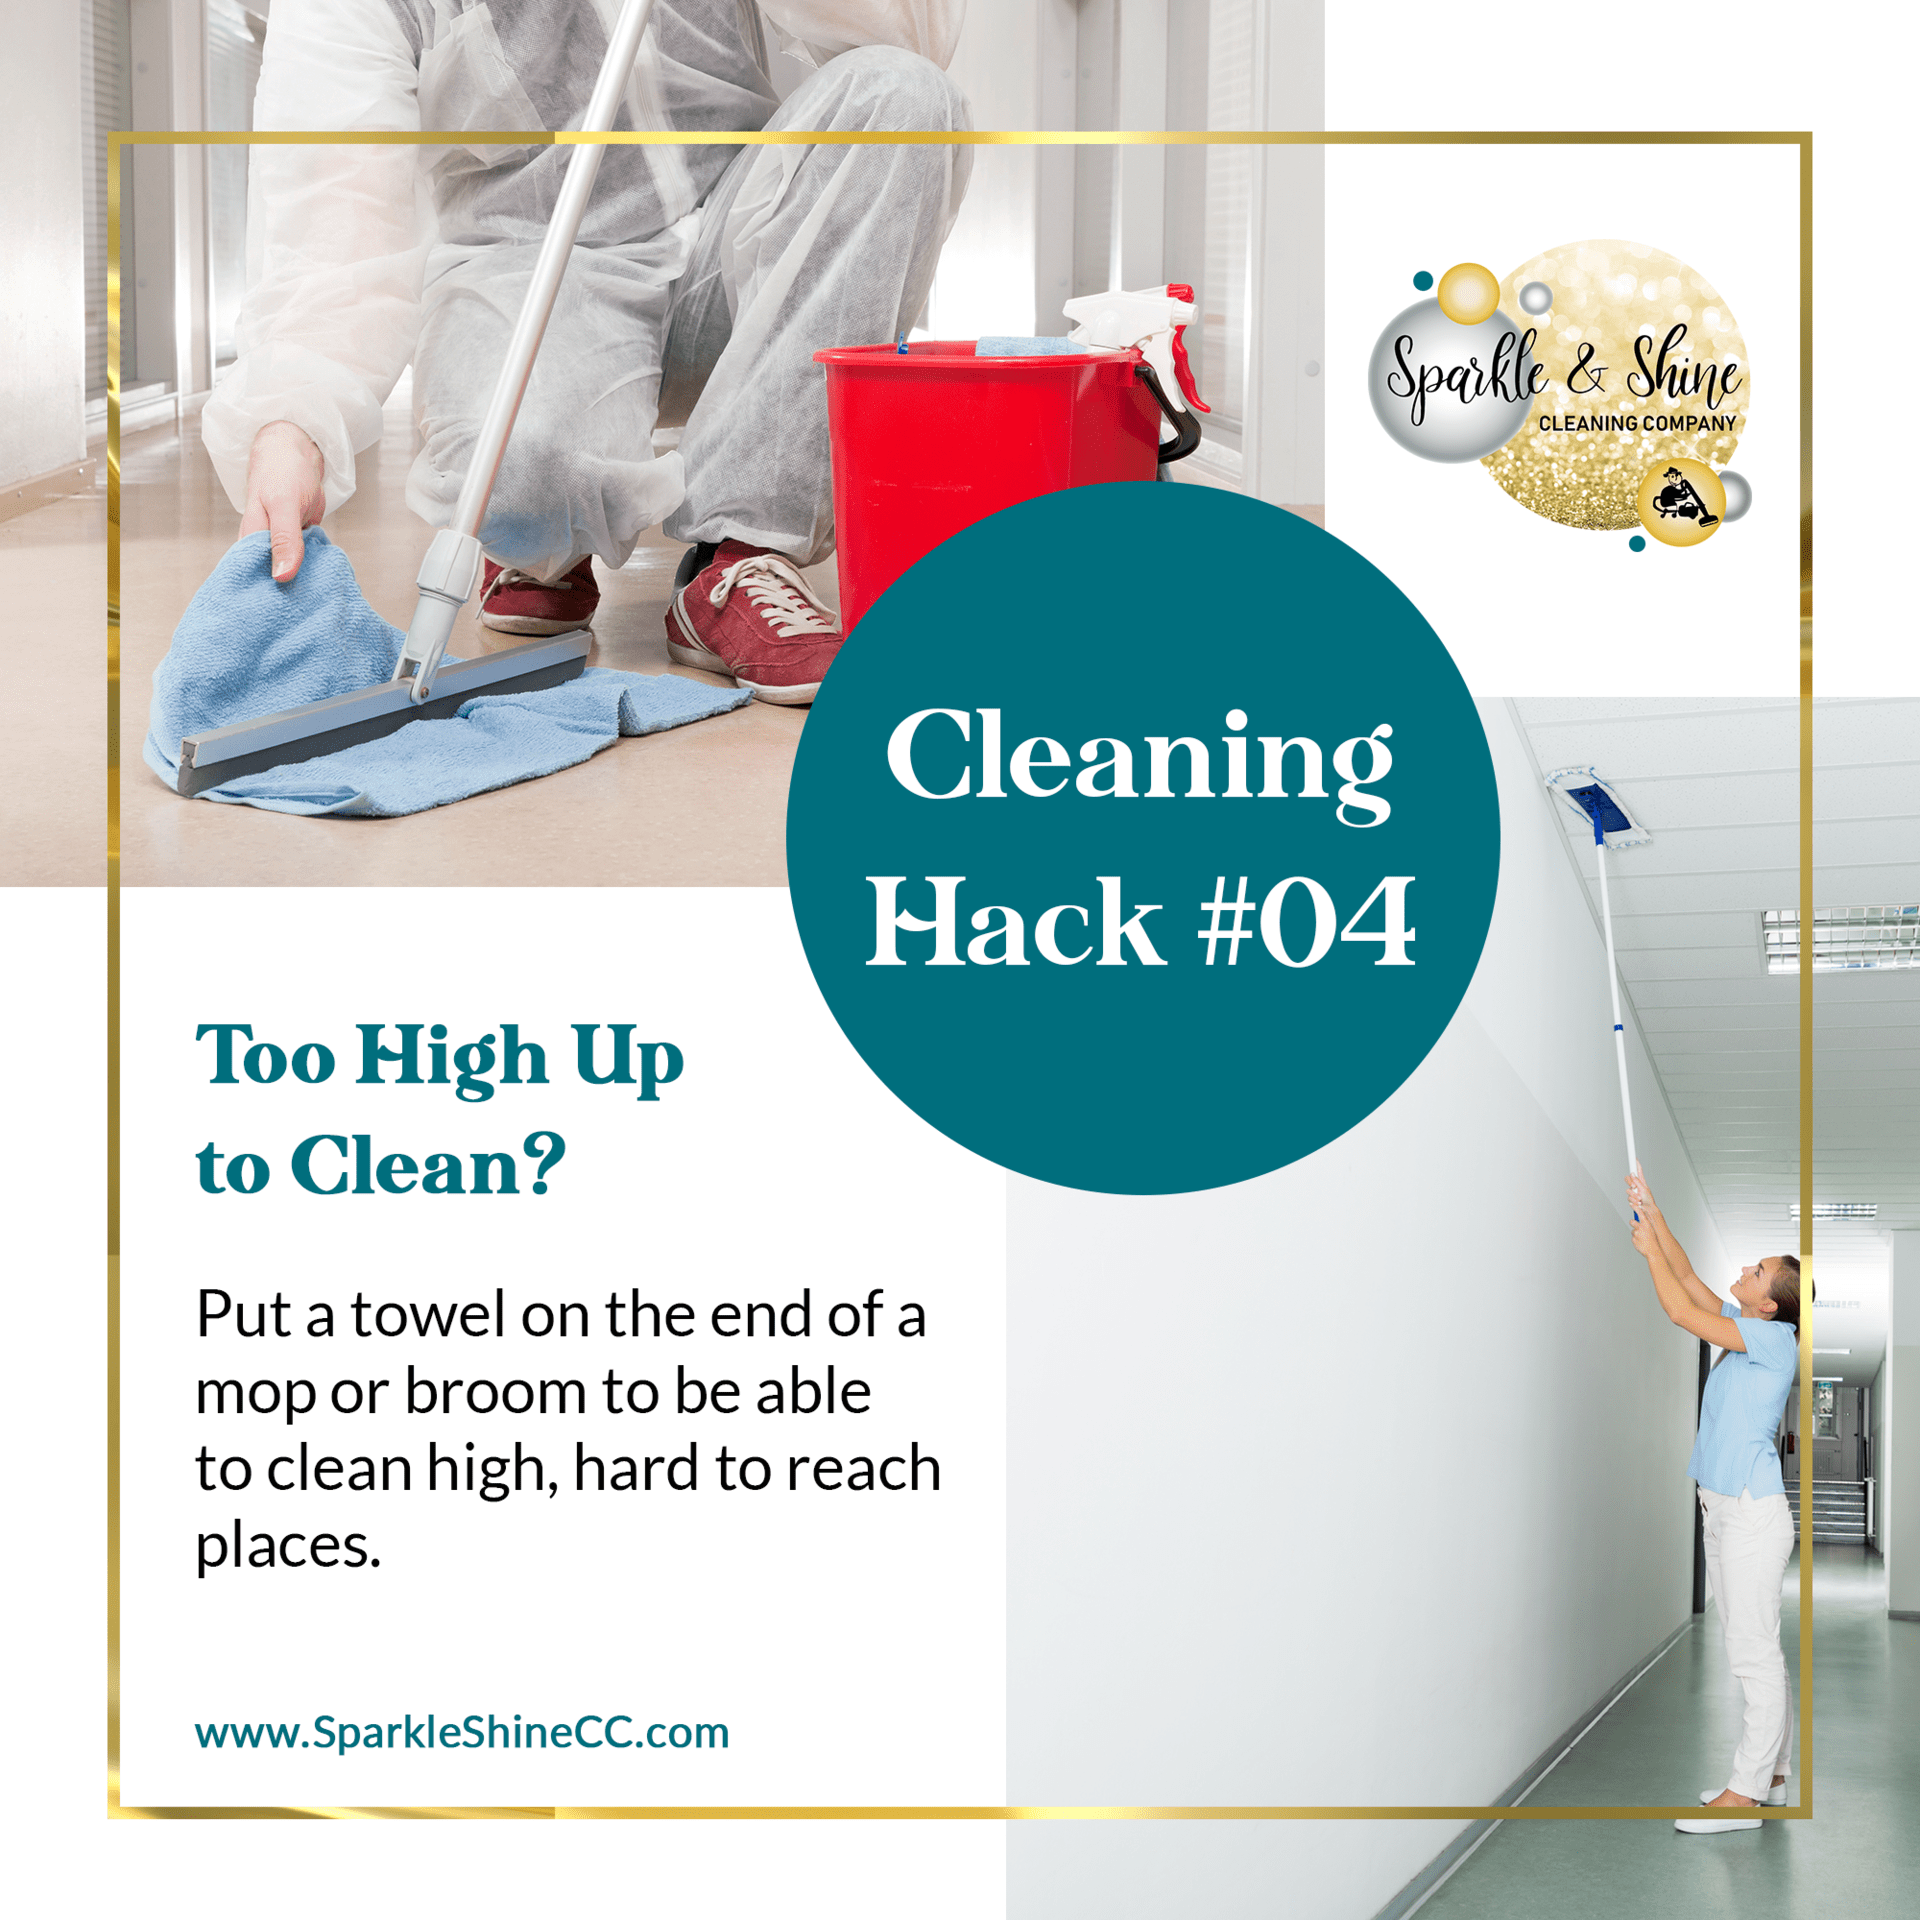 https://sparkleshinecc.com/wp-content/uploads/2019/06/Cleaning-Hack-04.png